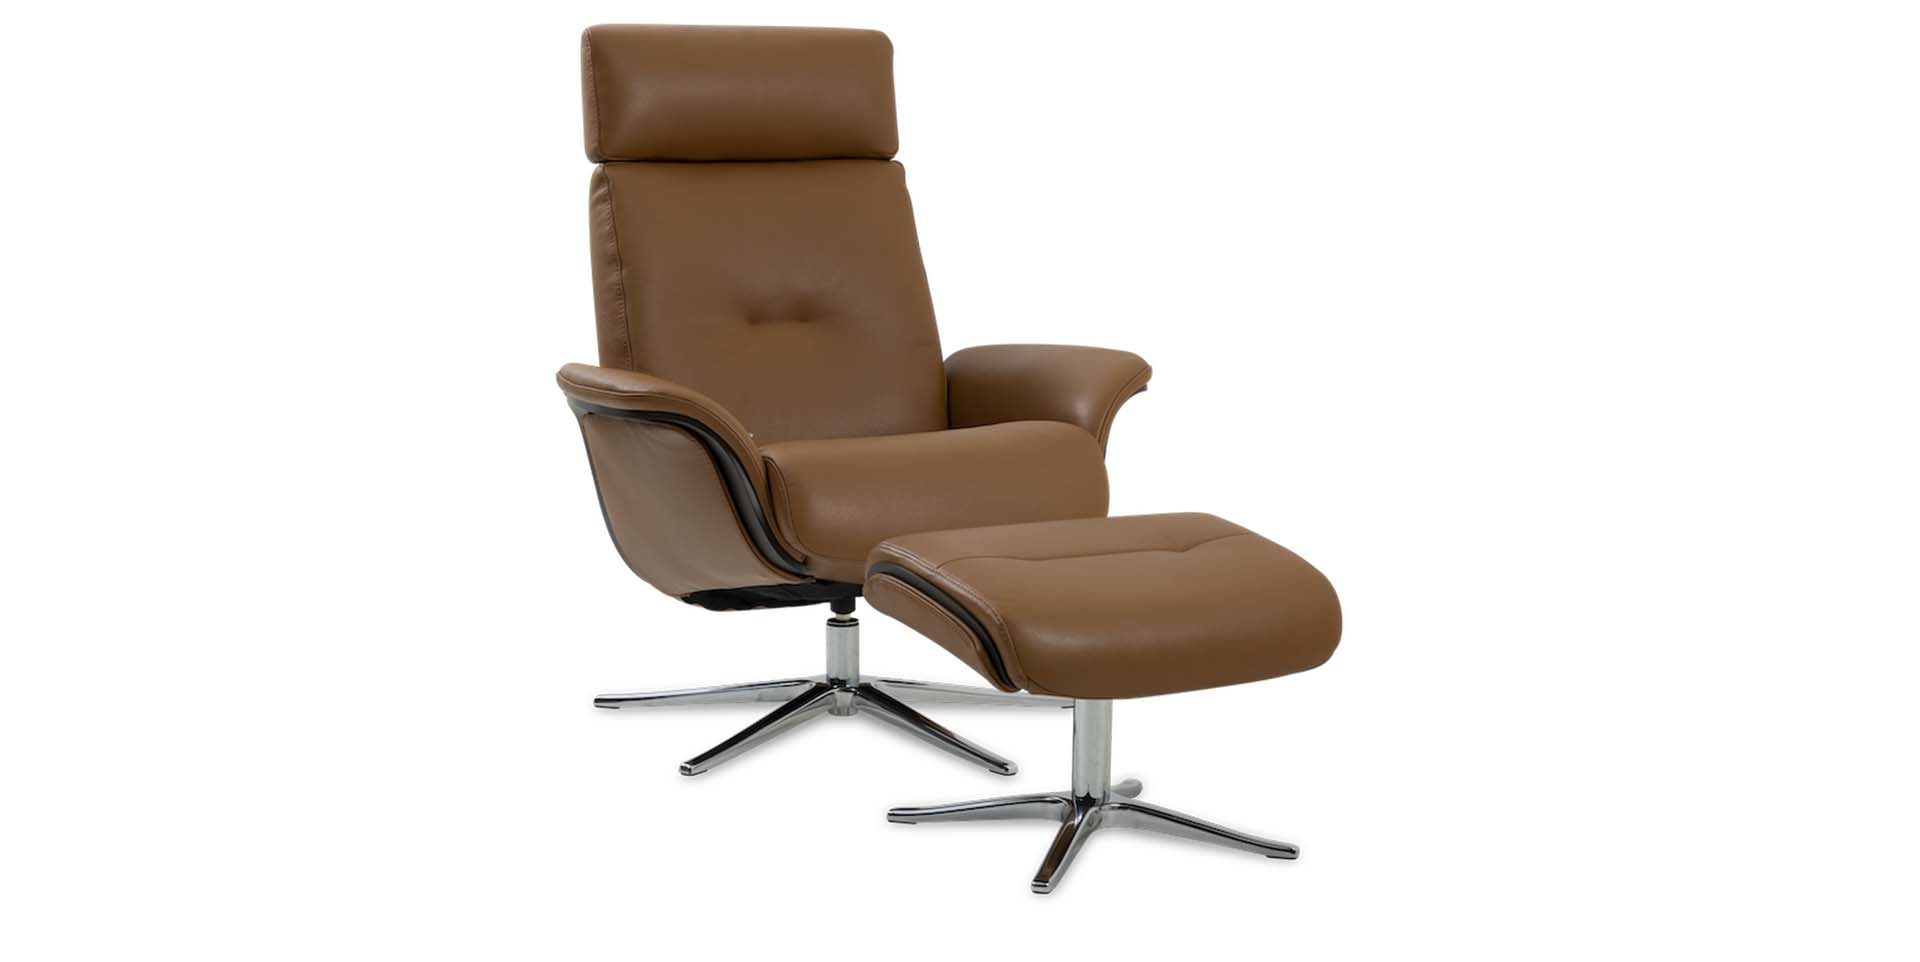 Slider Fauteuil relaxation SIGRID 5000 SP (image 4)